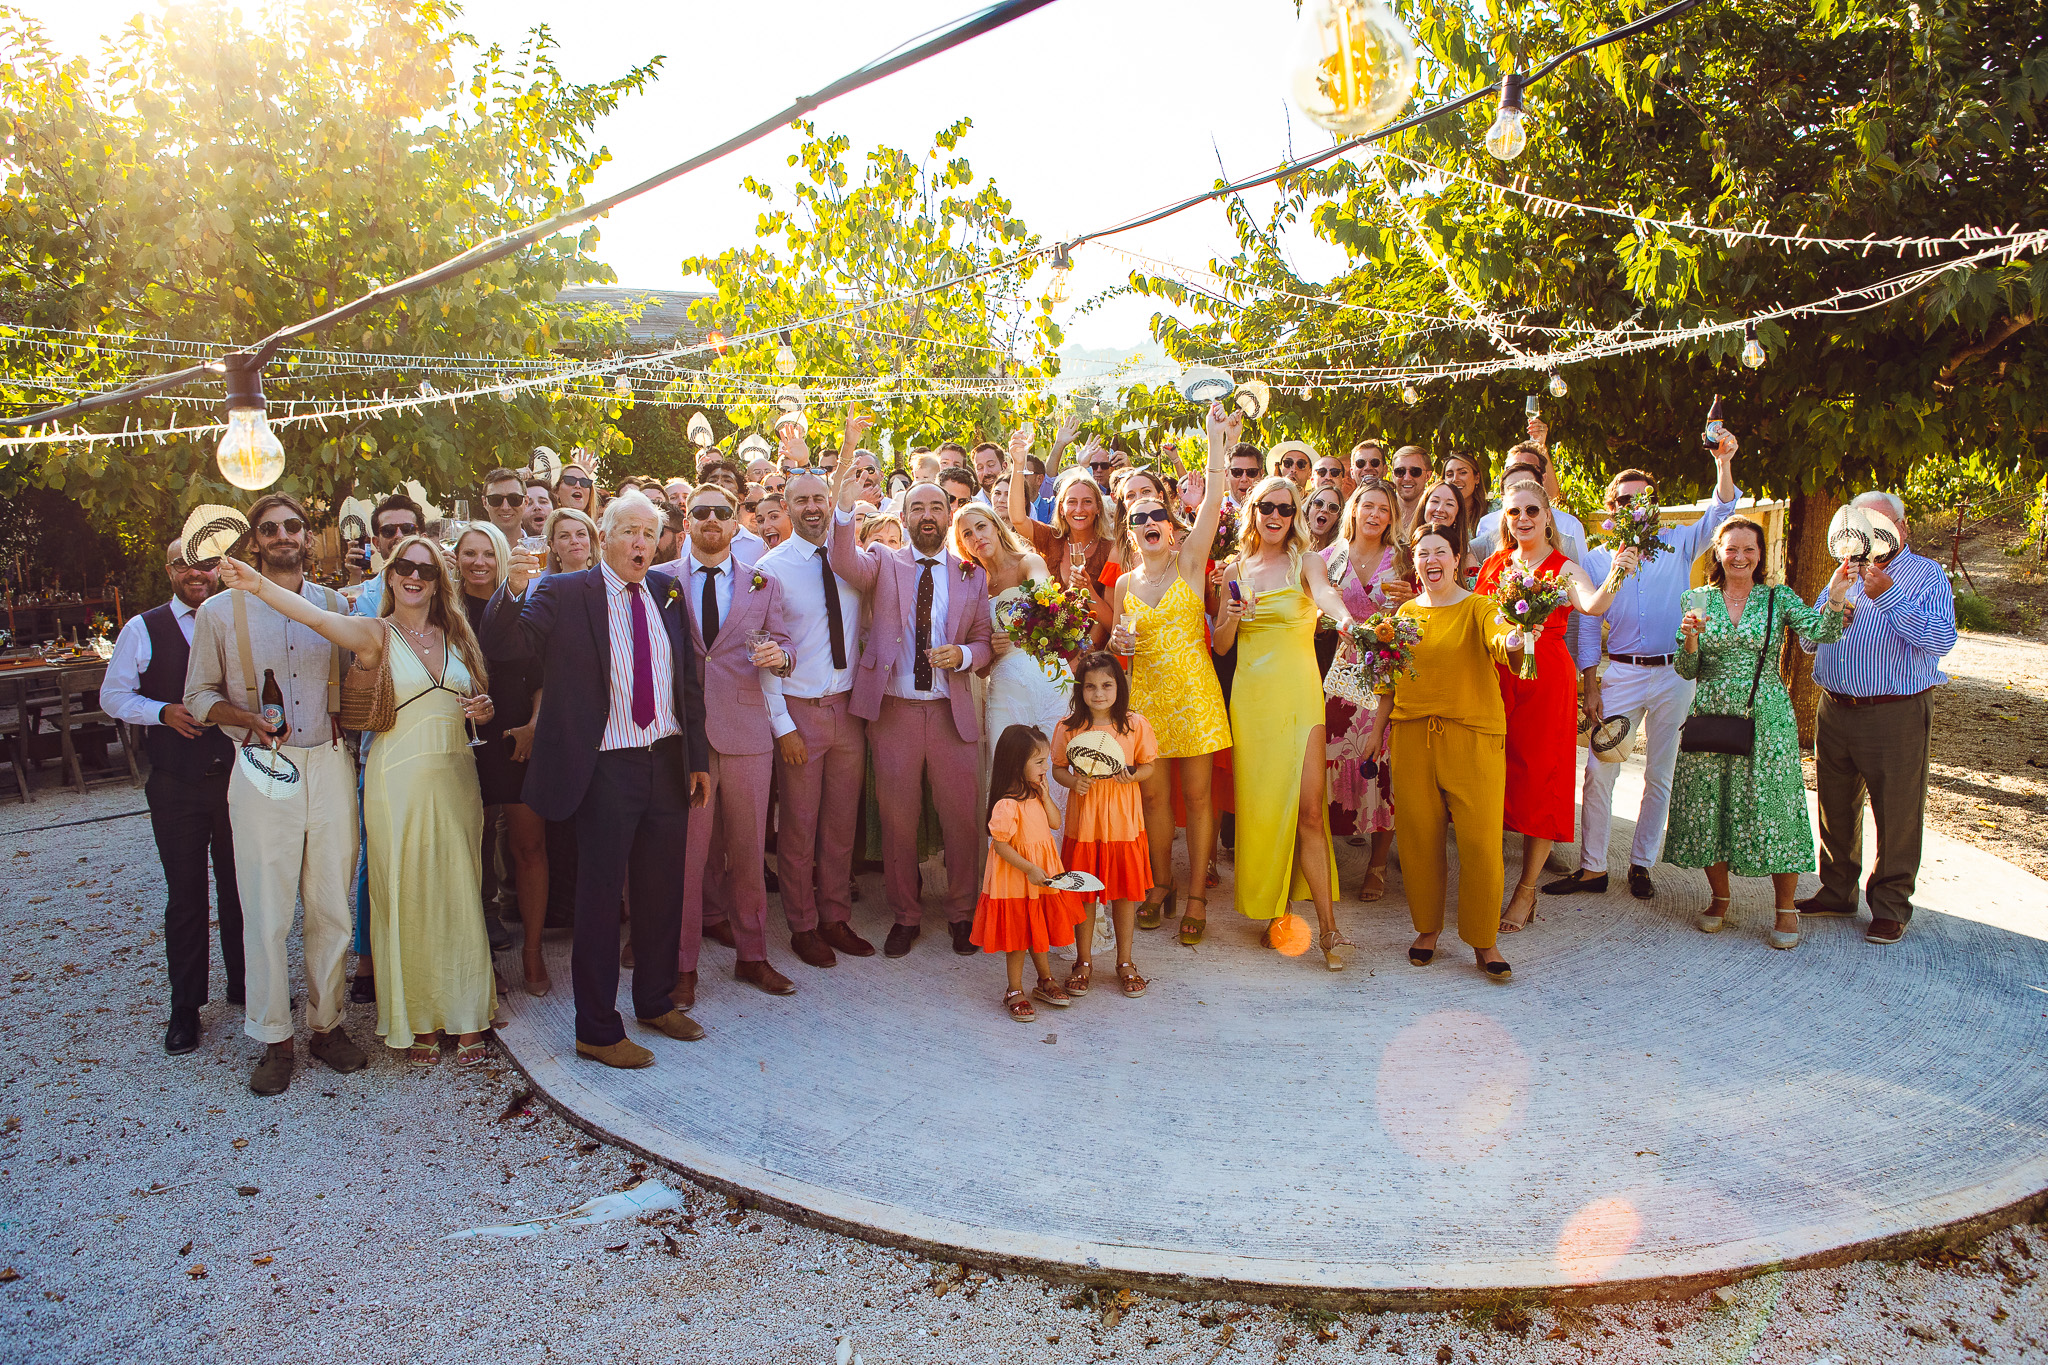 A large group shot of all the wedding guests shouting in the sunny Ambelonas Vineyard, Corfu